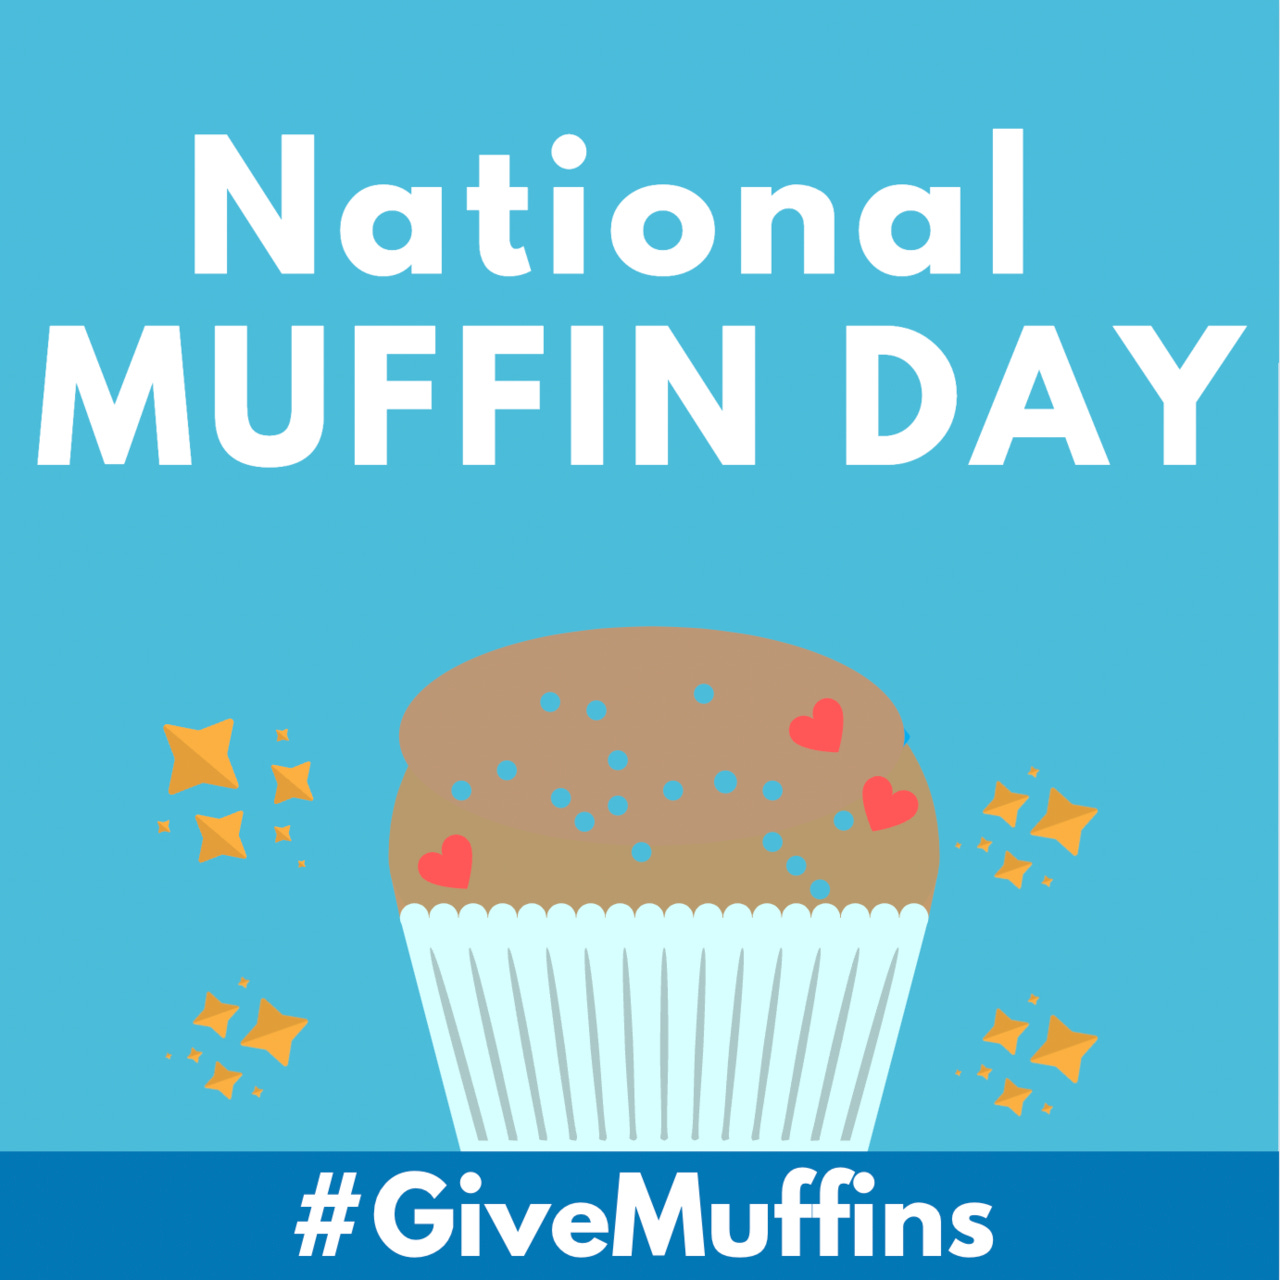 Artwork for National Muffin Day